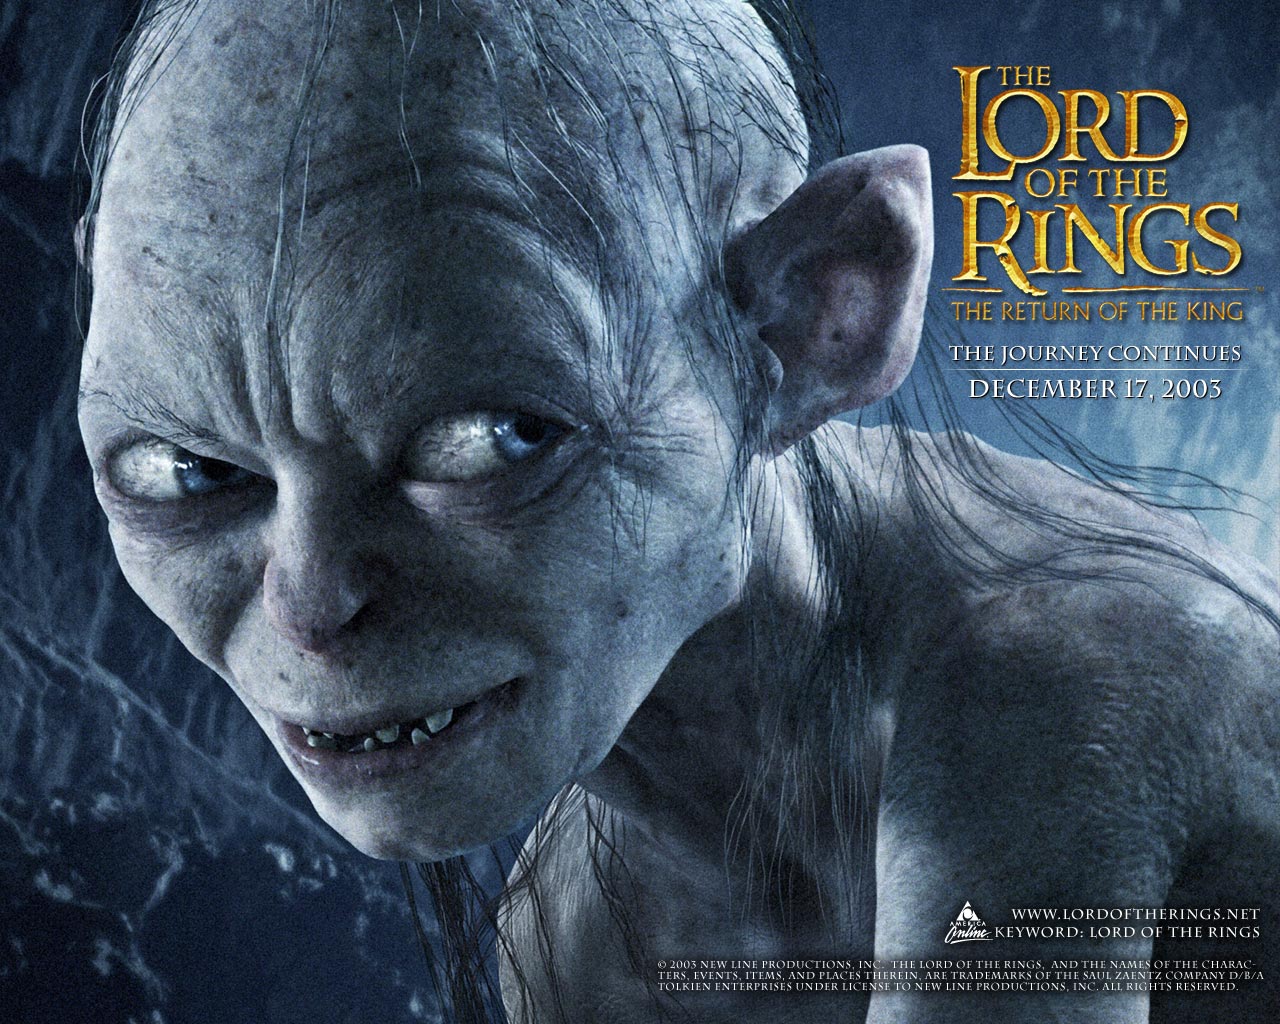 Download HQ Lord Of The Rings wallpaper / Movies / 1280x1024